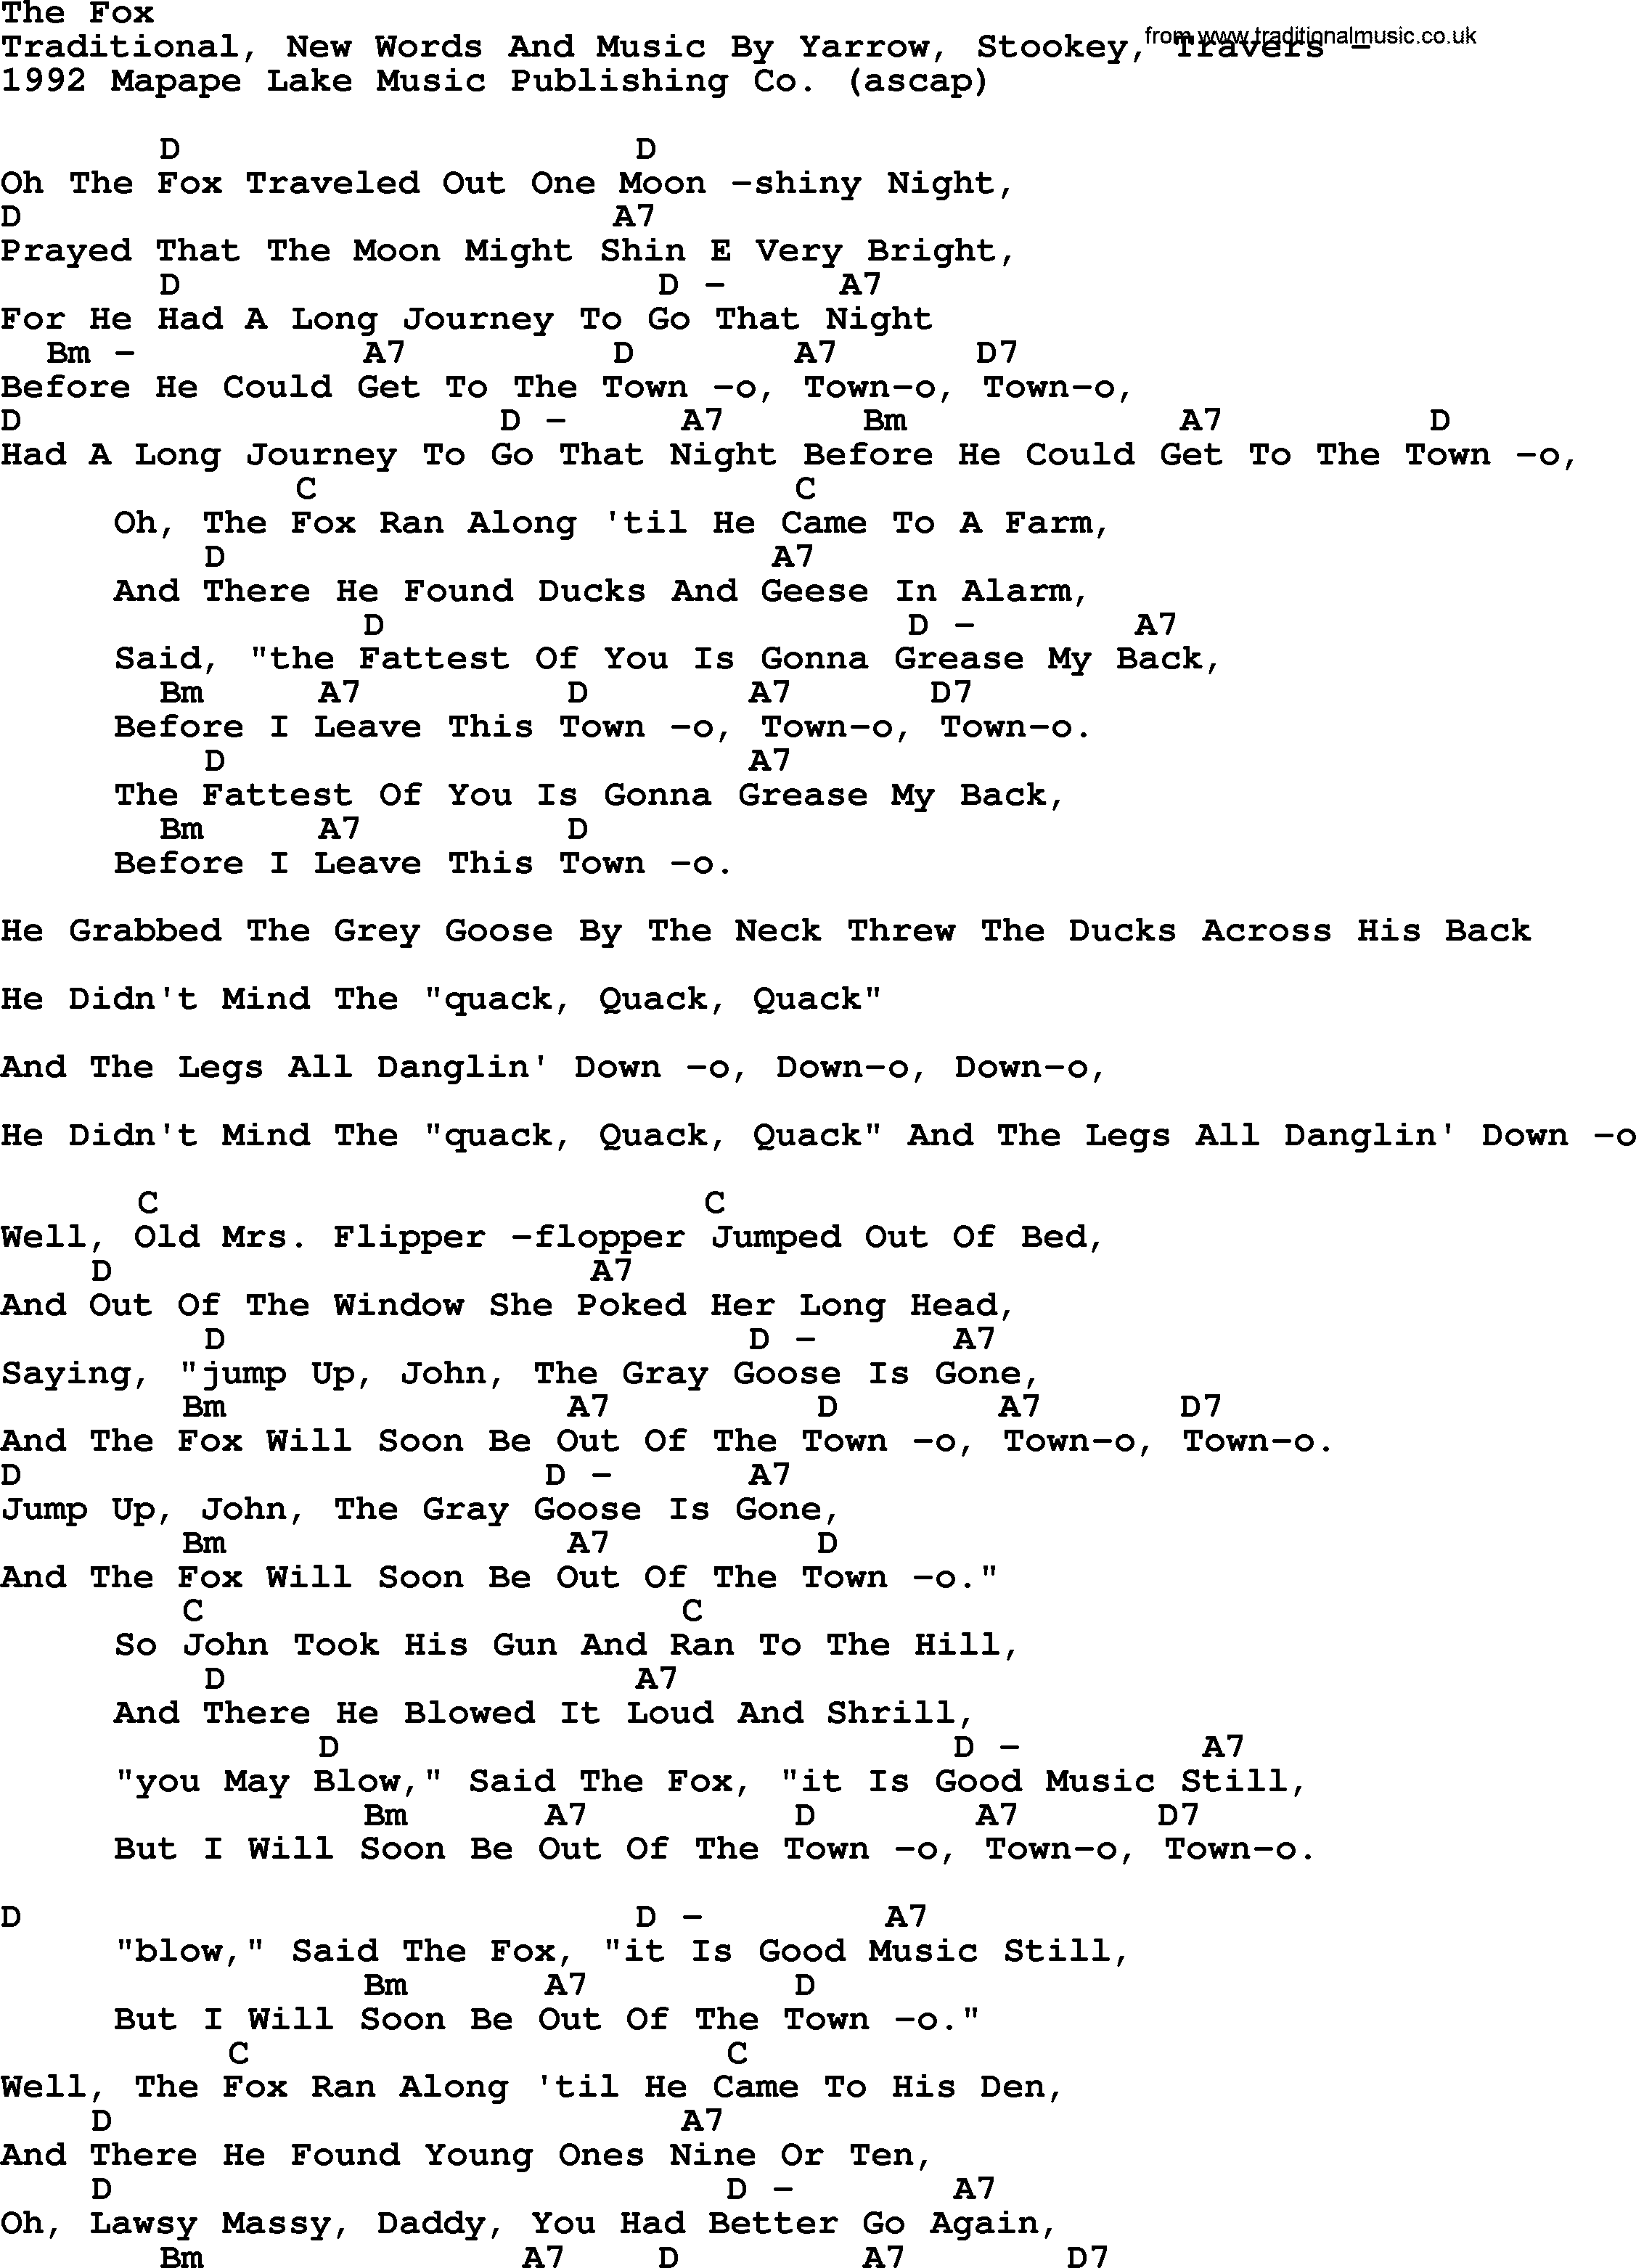 Peter, Paul and Mary song The Fox, lyrics and chords